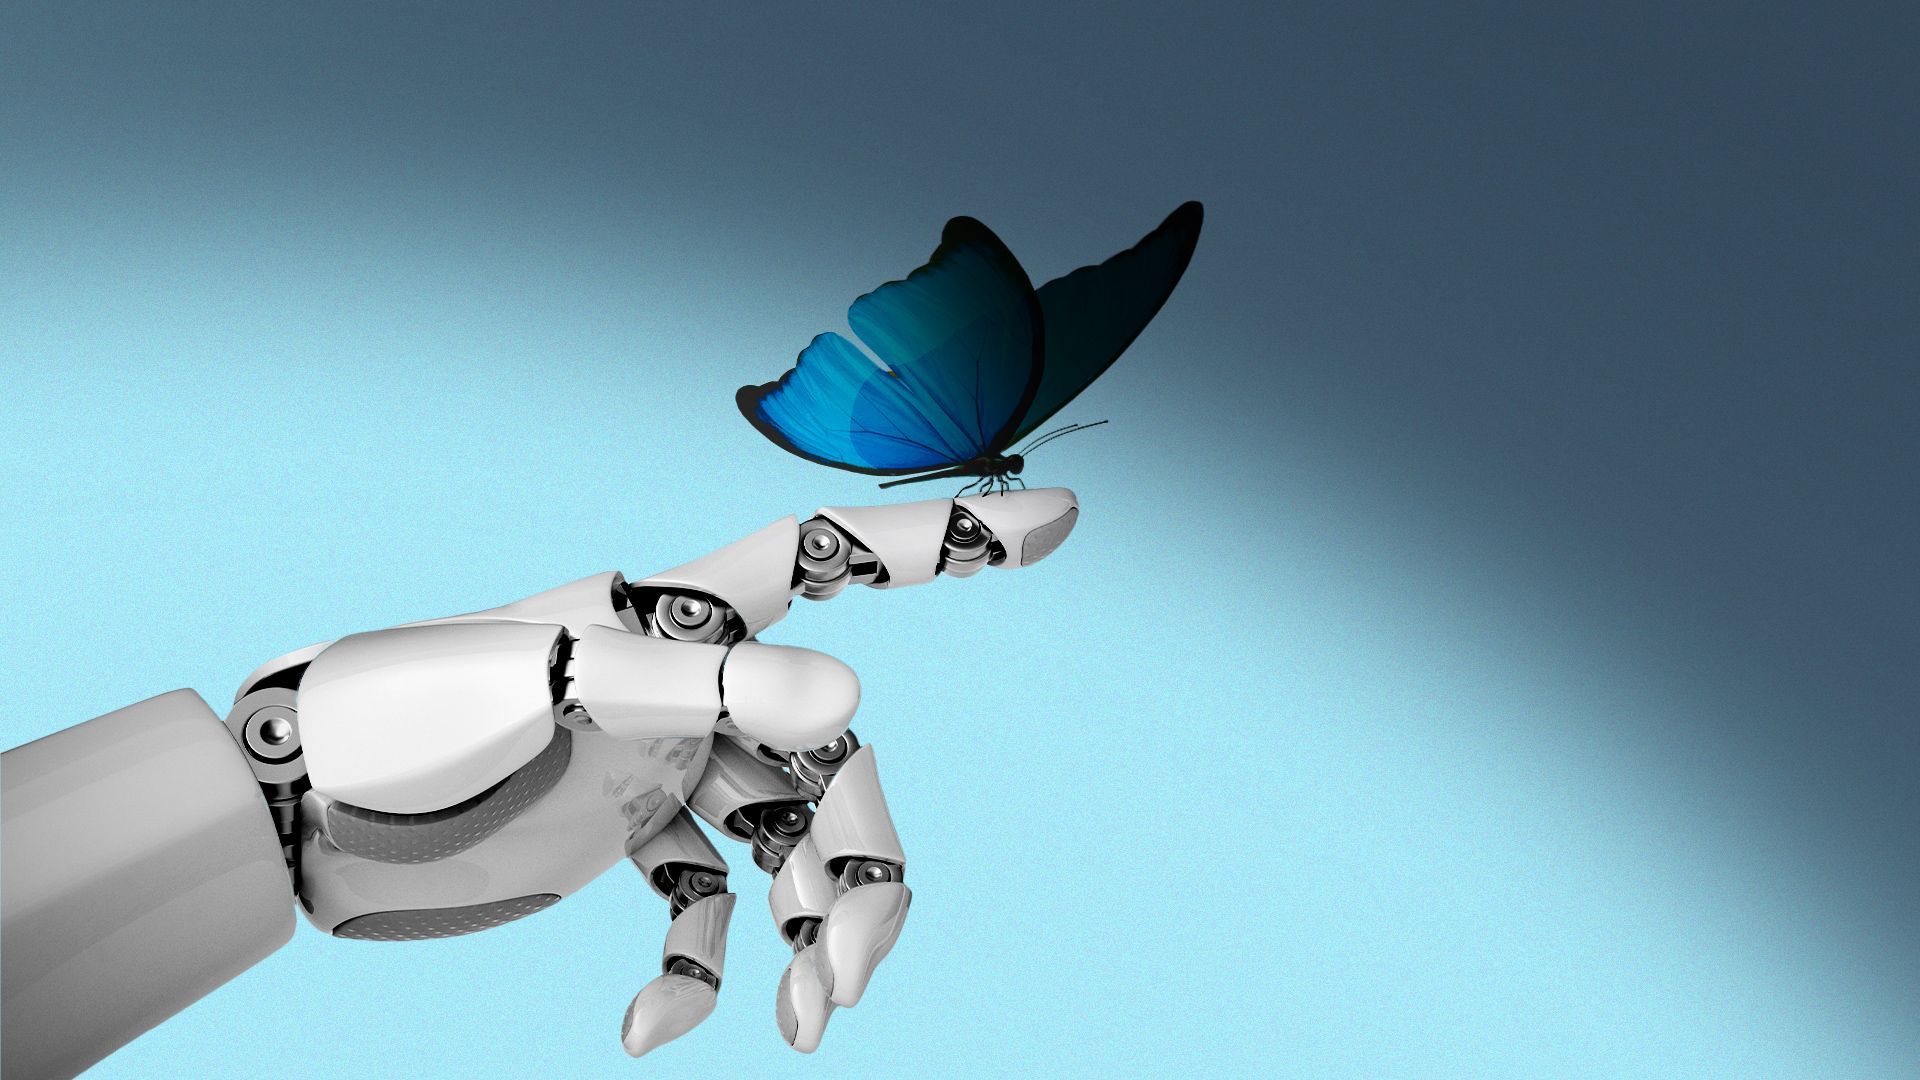 Illustration of a butterfly perched on a robot's finger with a shadow moving over it.